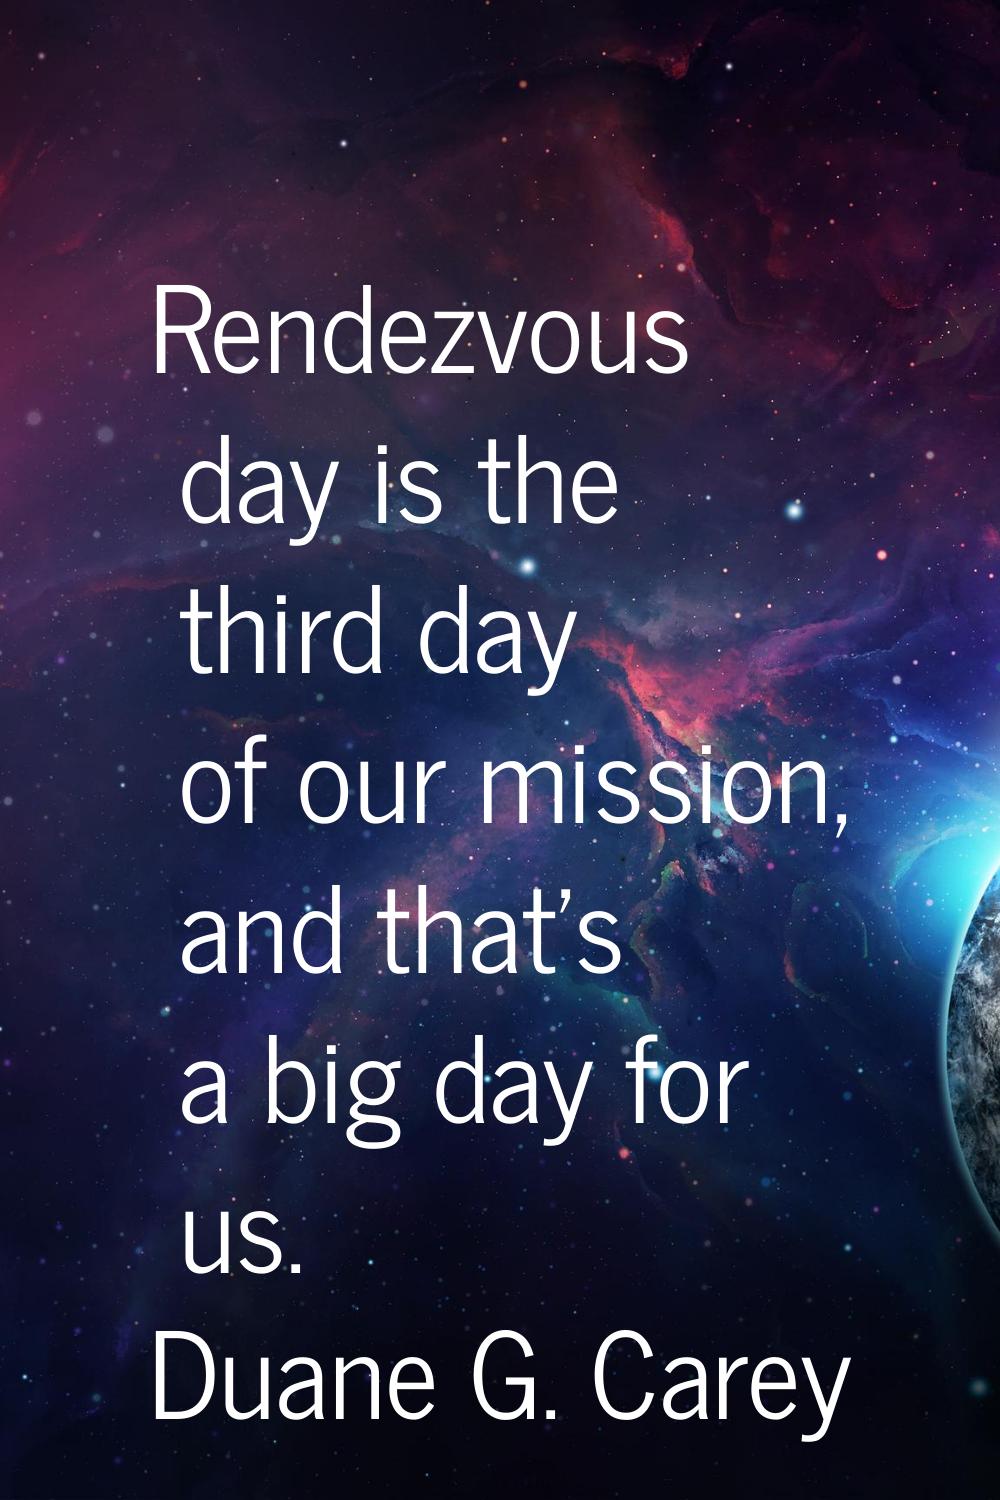 Rendezvous day is the third day of our mission, and that's a big day for us.